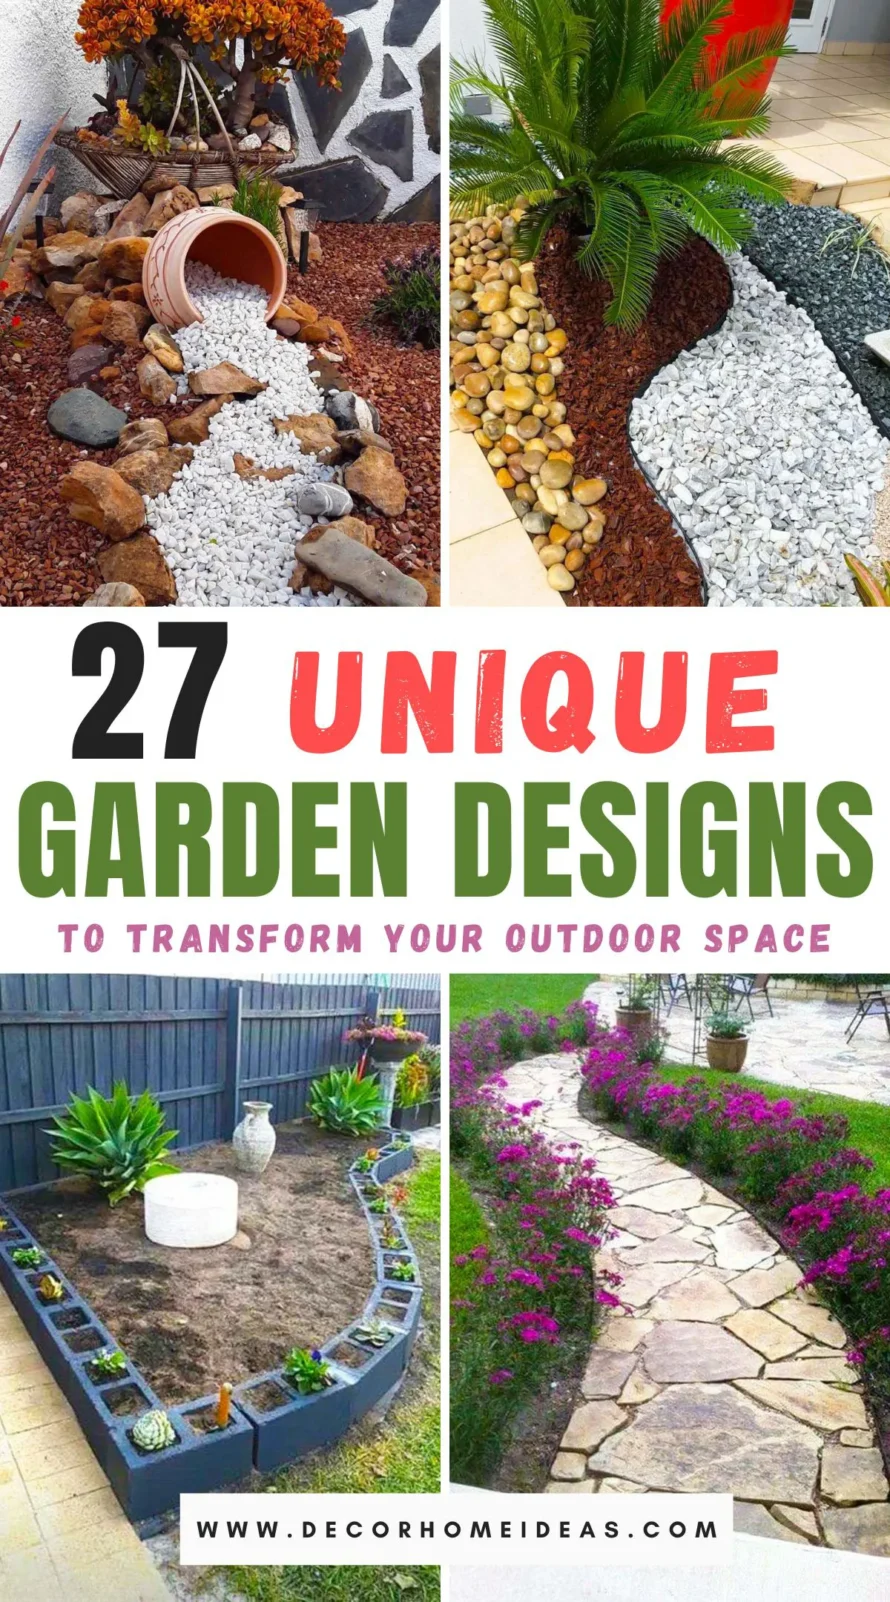 Explore 27 captivating garden ideas that will help you craft your very own Eden. From lush plant arrangements to serene water features, each design is a gateway to creating a tranquil outdoor sanctuary. Ready to bring paradise to your backyard?